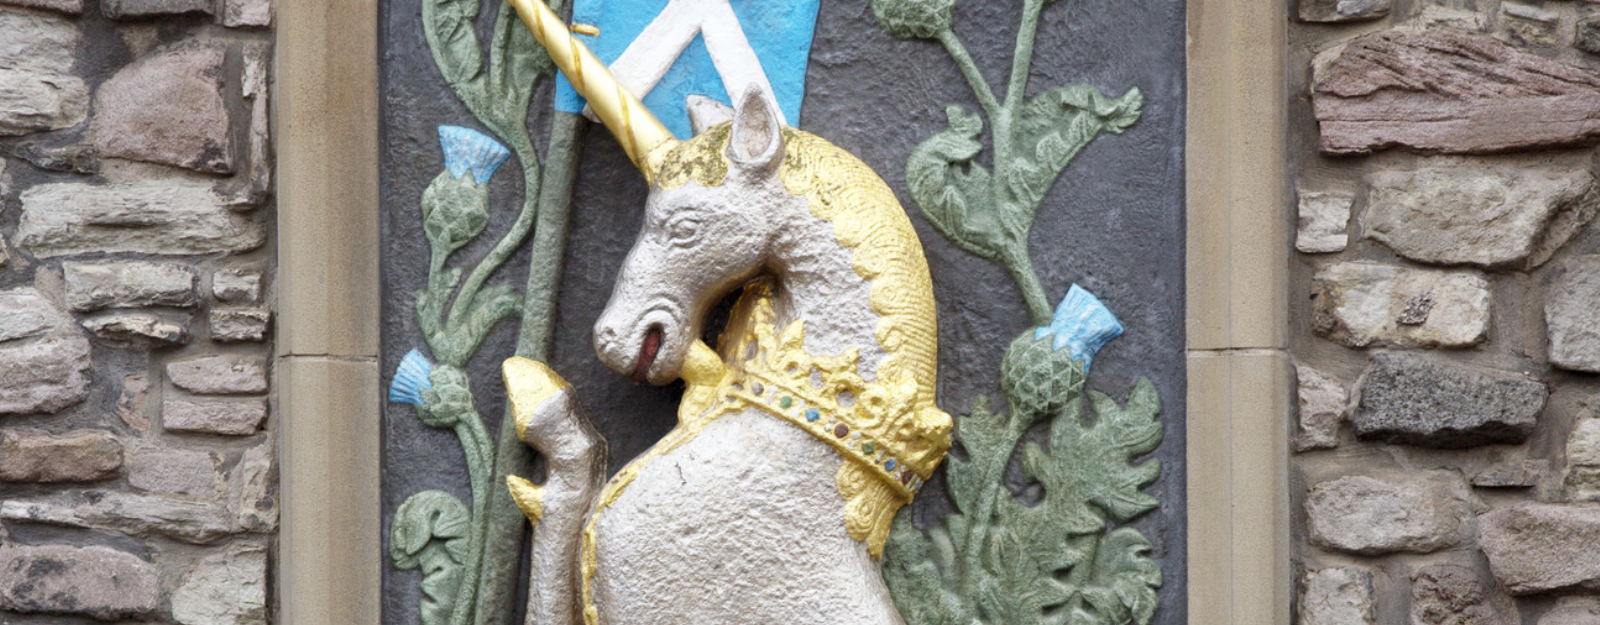 painted stone carving of a unicorn 